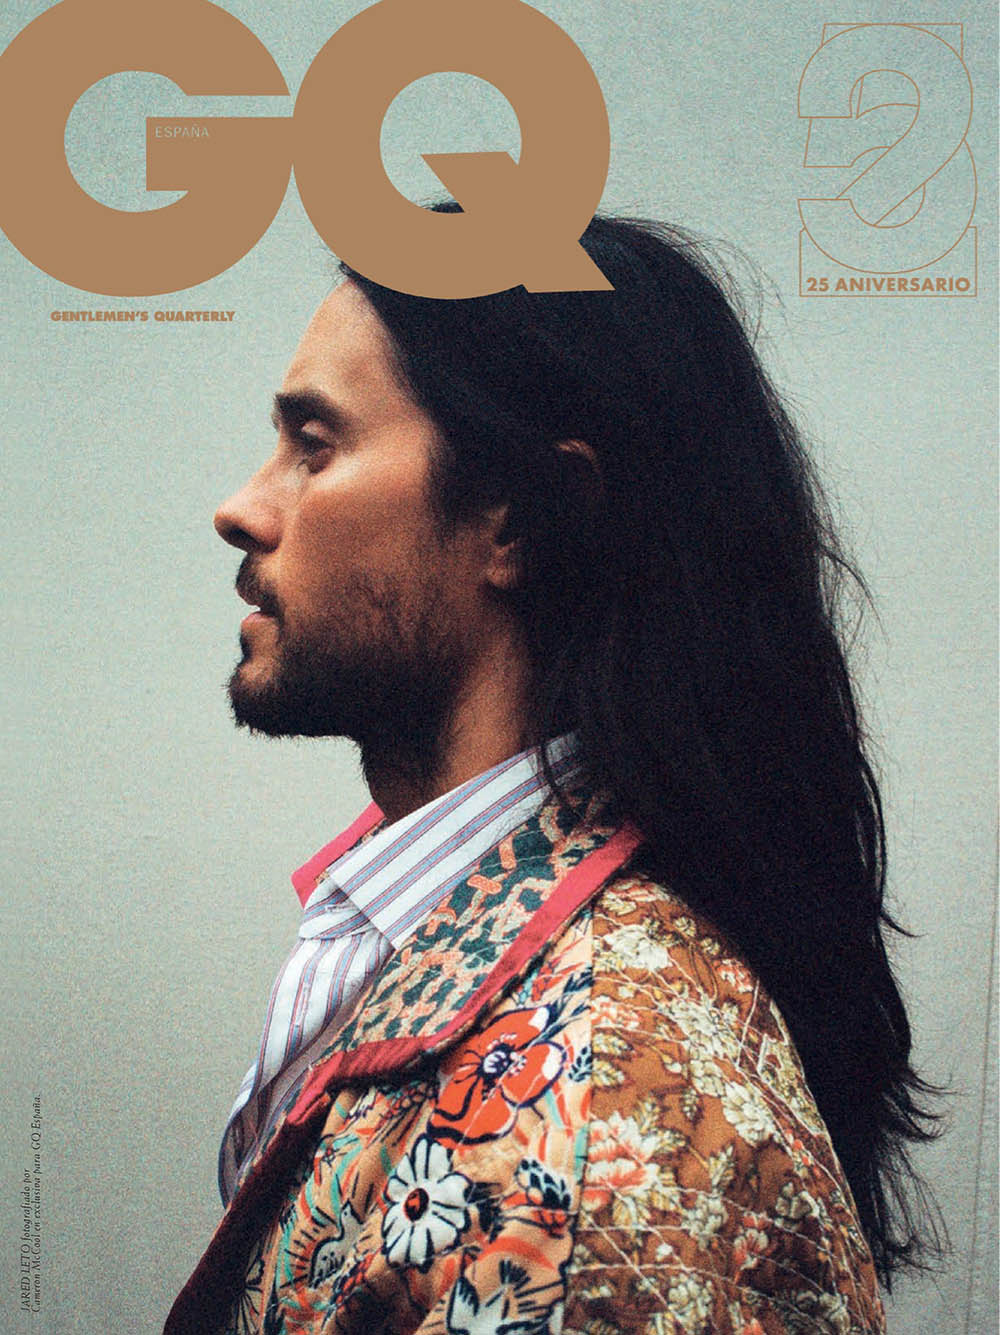 Jared Leto covers GQ Spain September 2019 by Cameron McCool